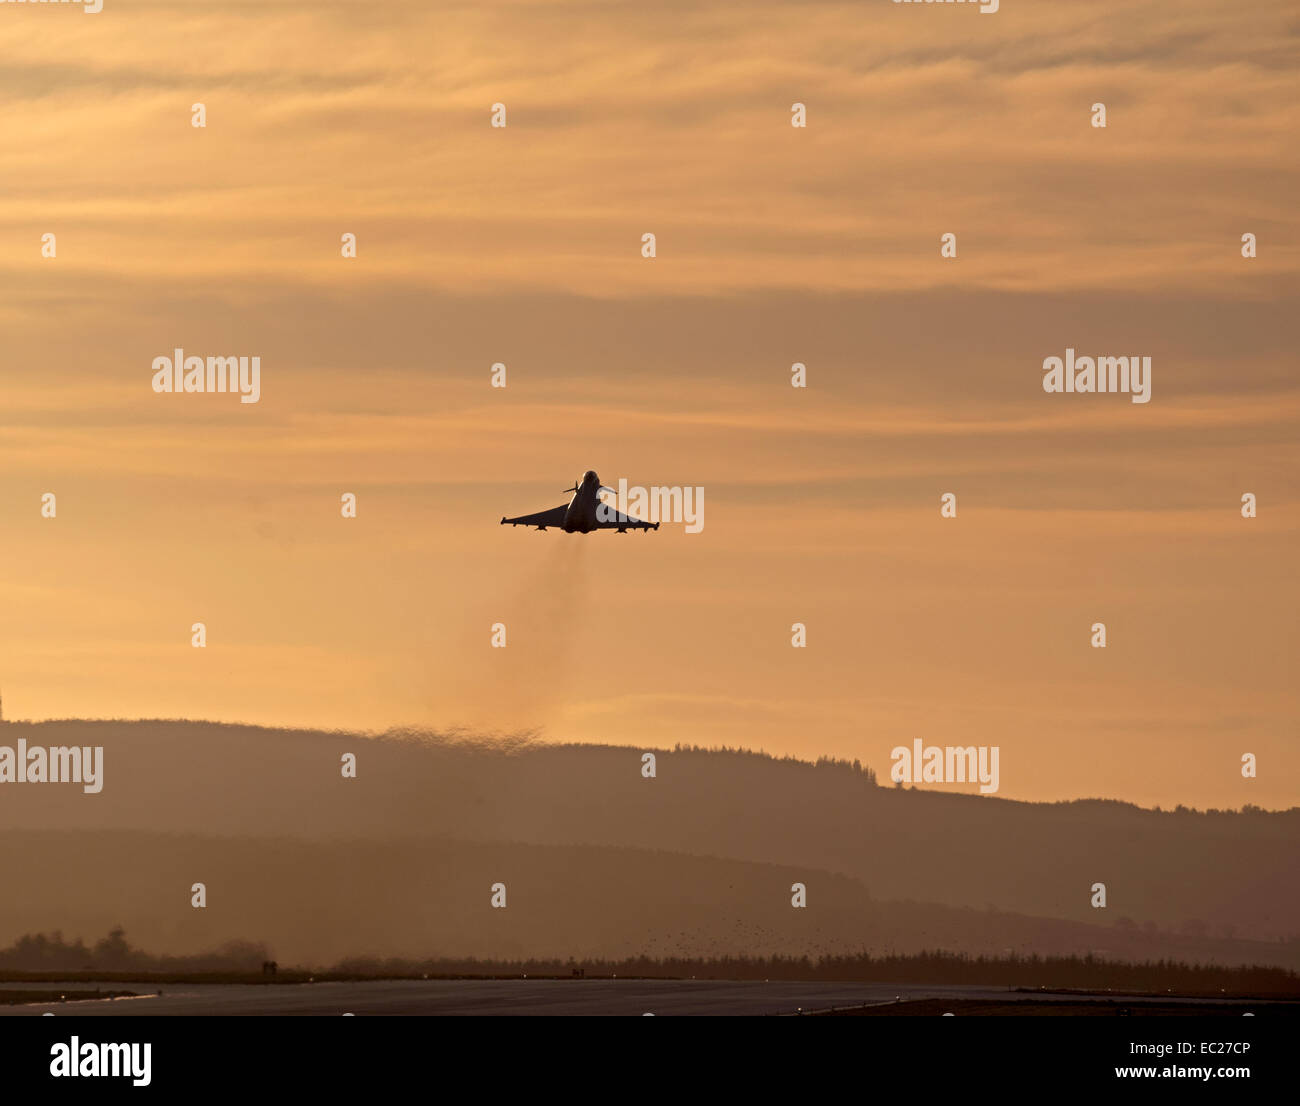 Evening take off for a Eurofighter Typhoon Jet at RAF Lossiemouth, Morashire, Scotland.  SCO 9298 Stock Photo